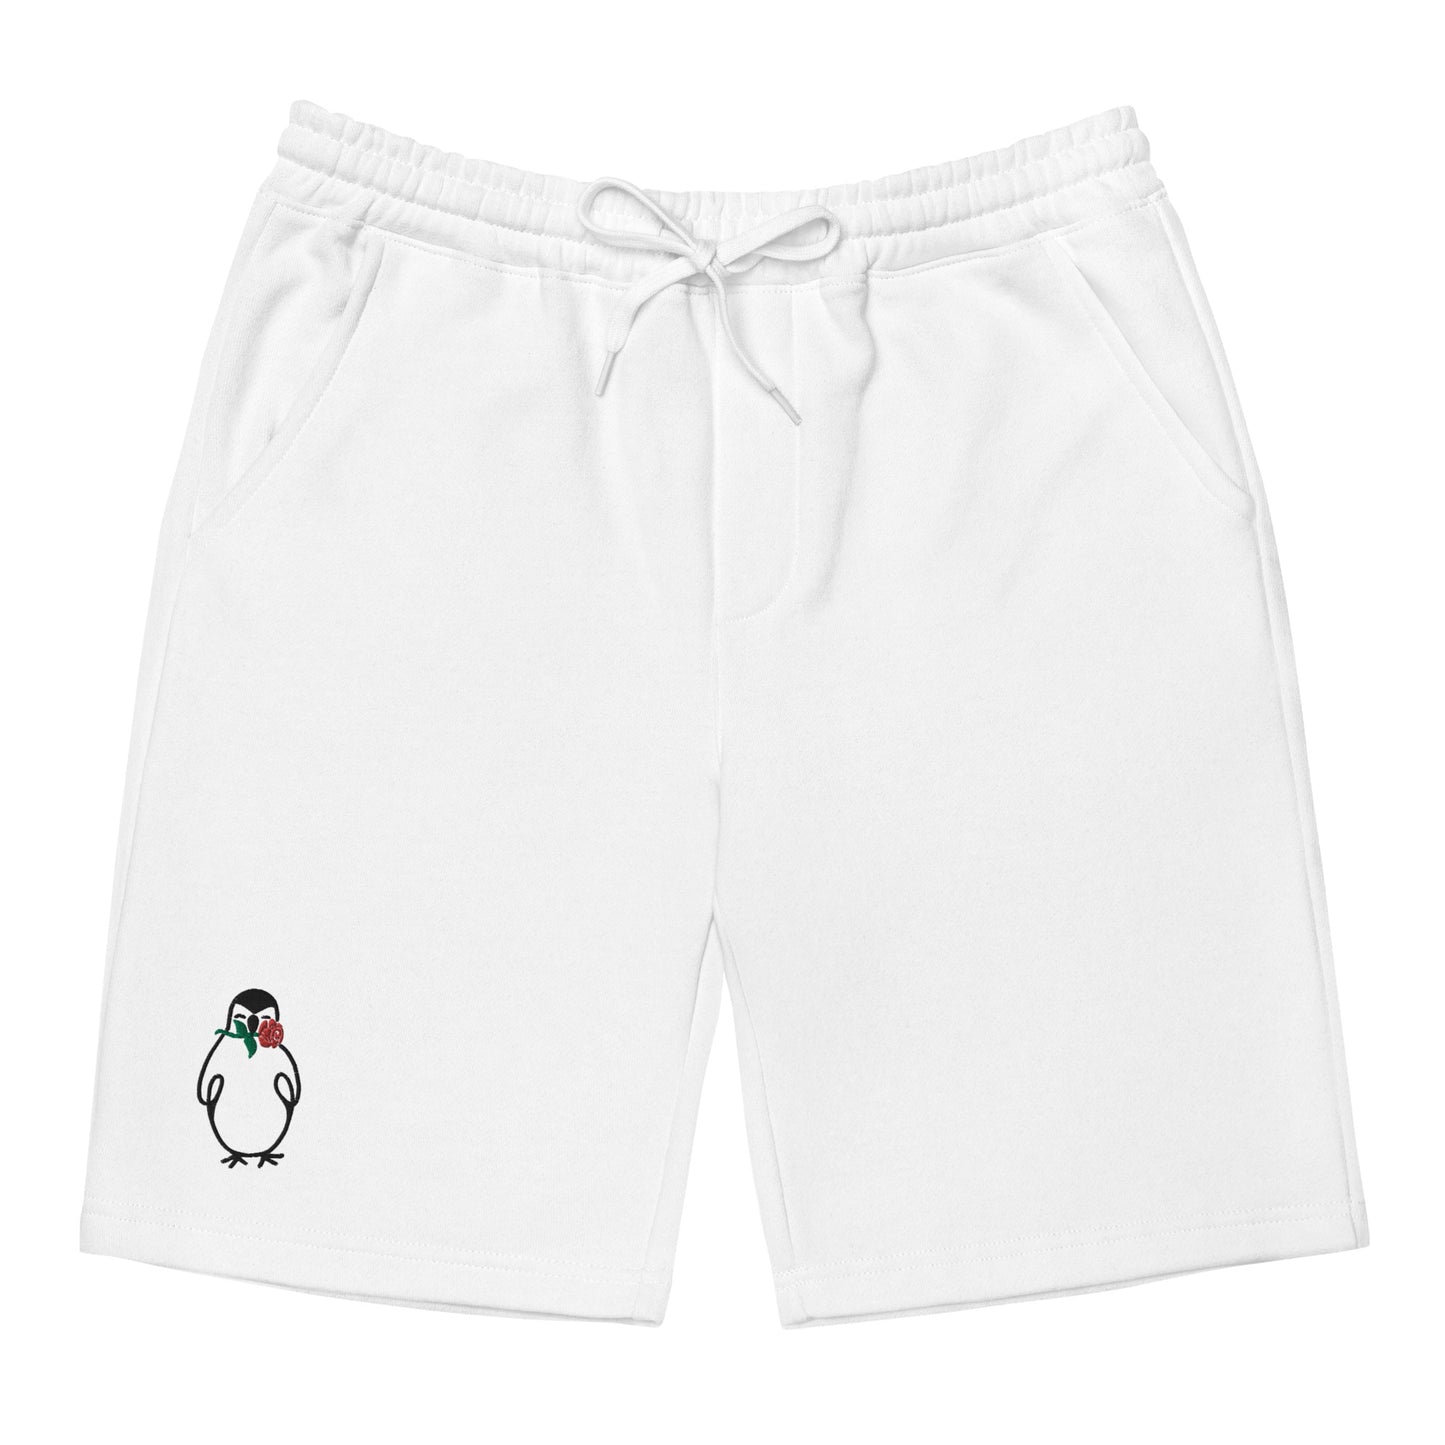 Gift From Penguin - Shorts